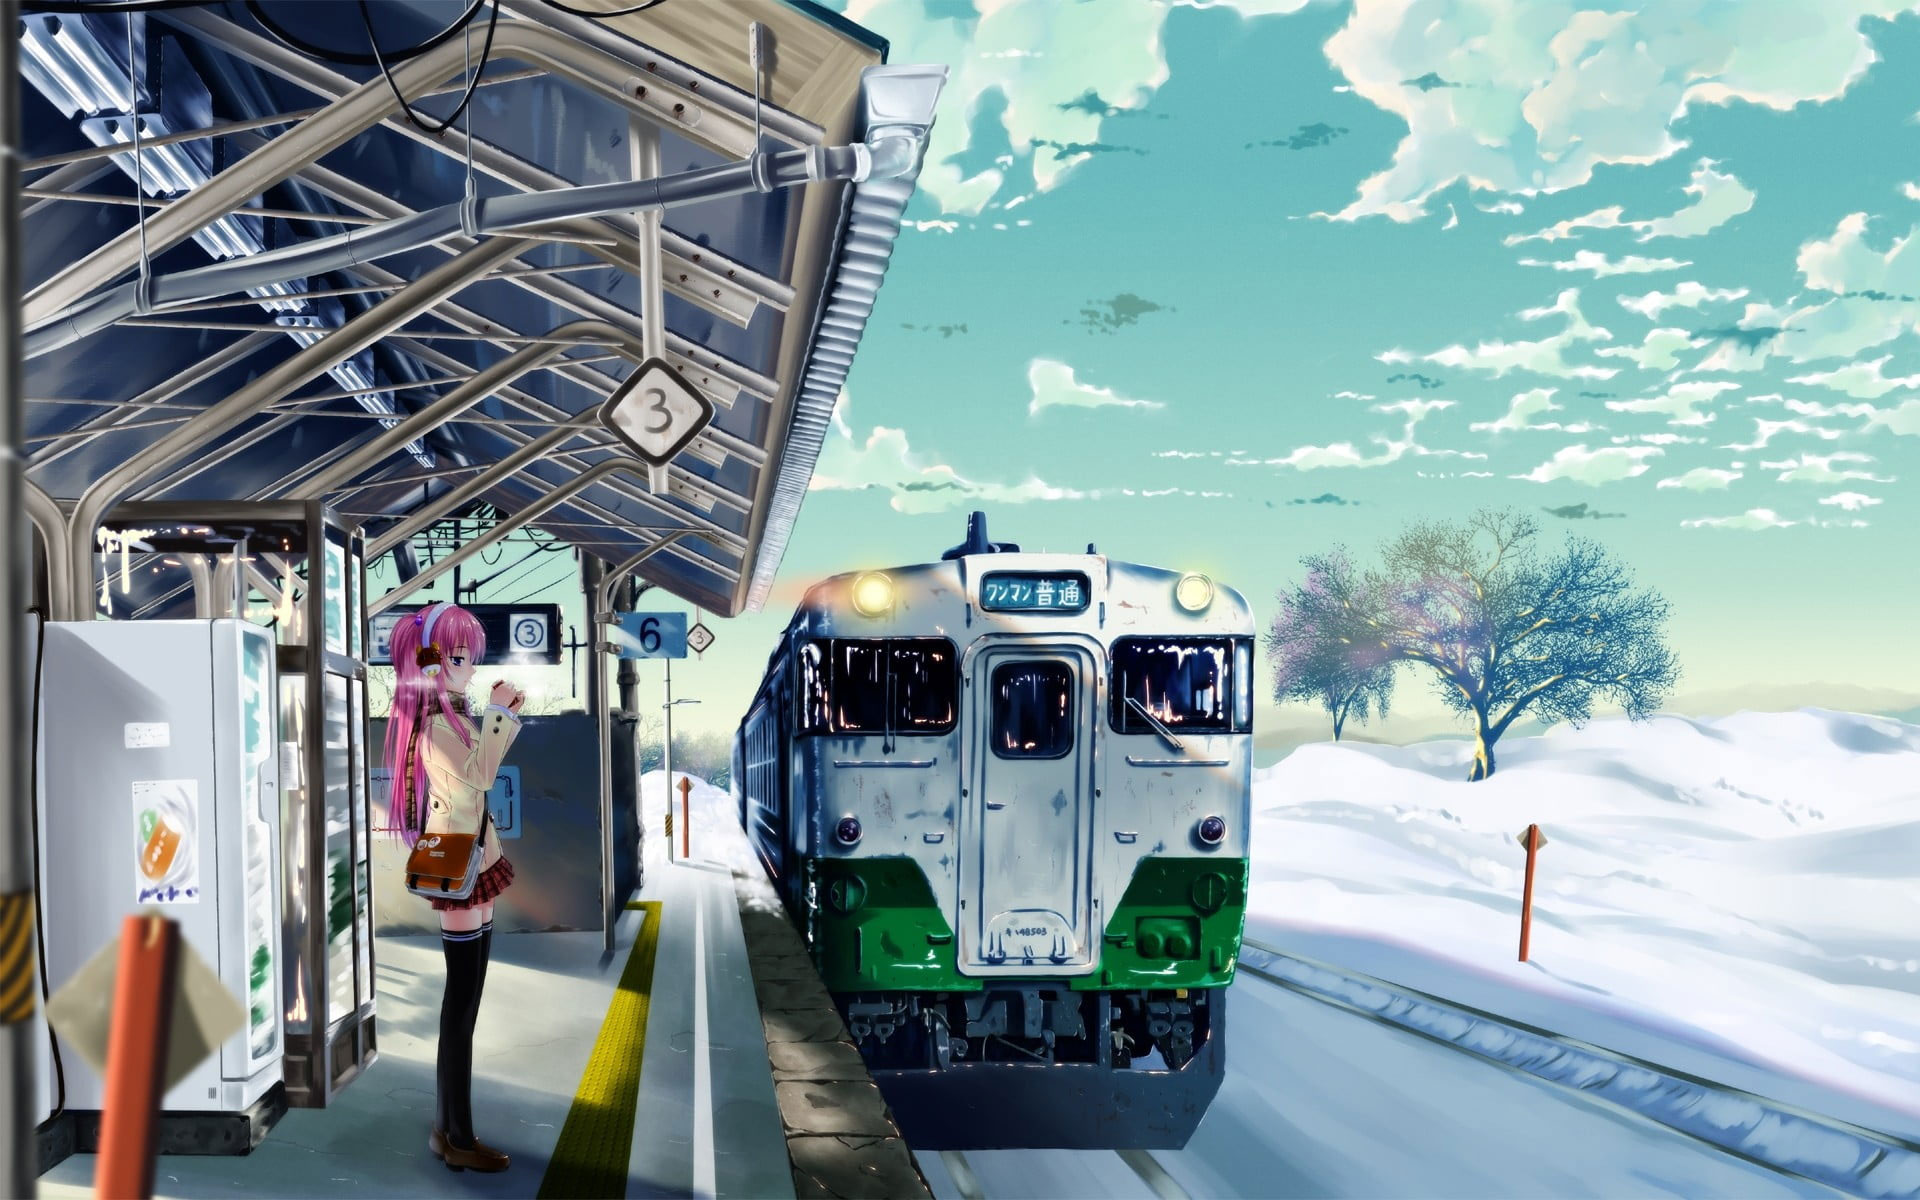 Pink-haired female anime character wallpaper, train, winter, train station